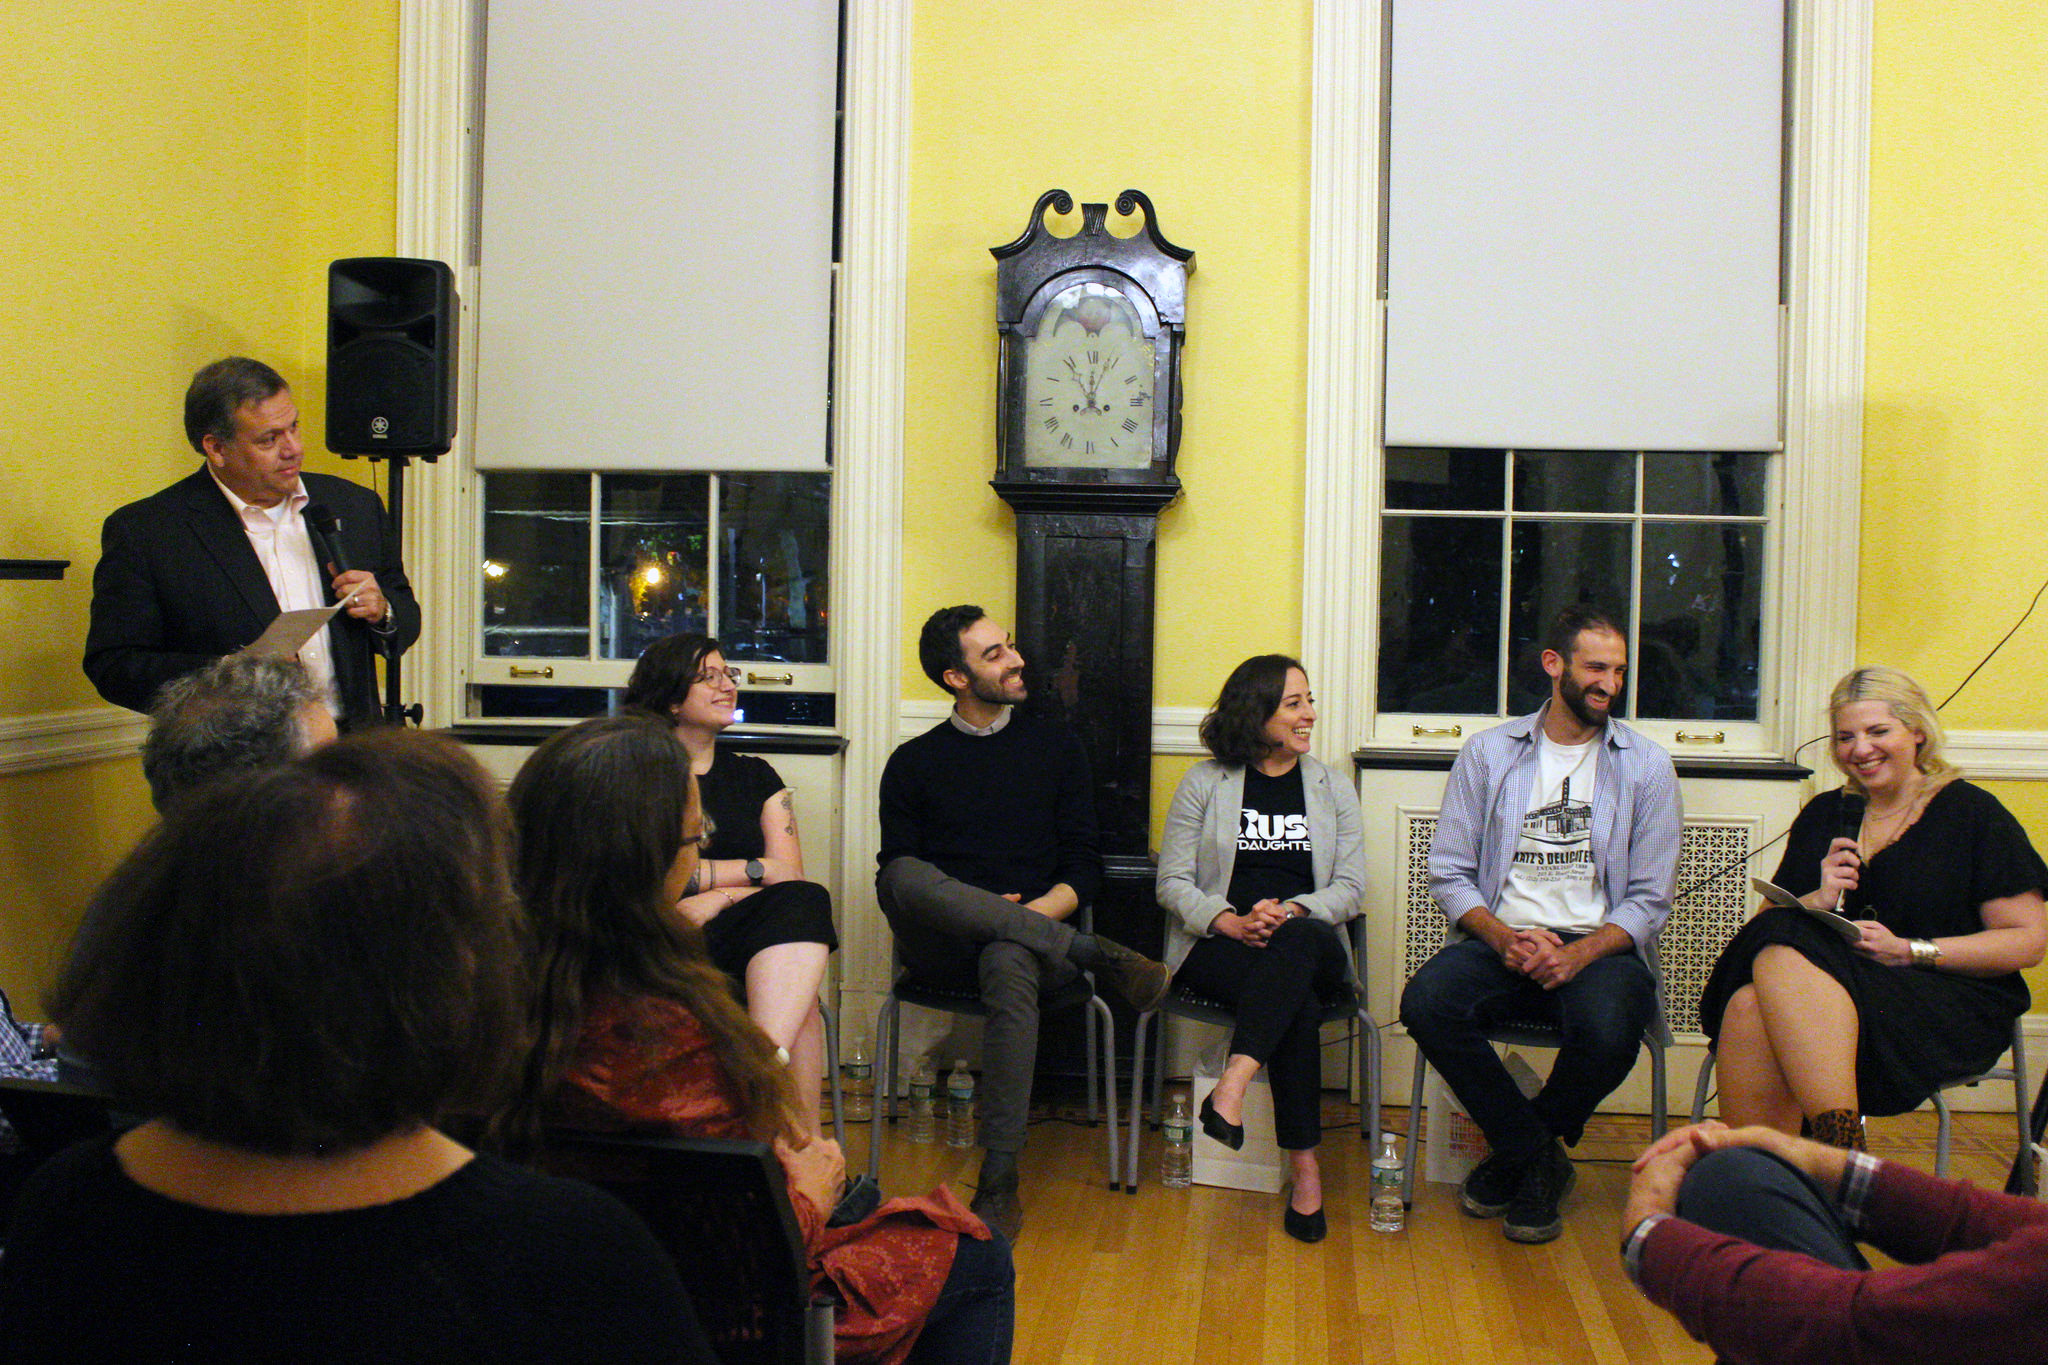 Panel and audience at event